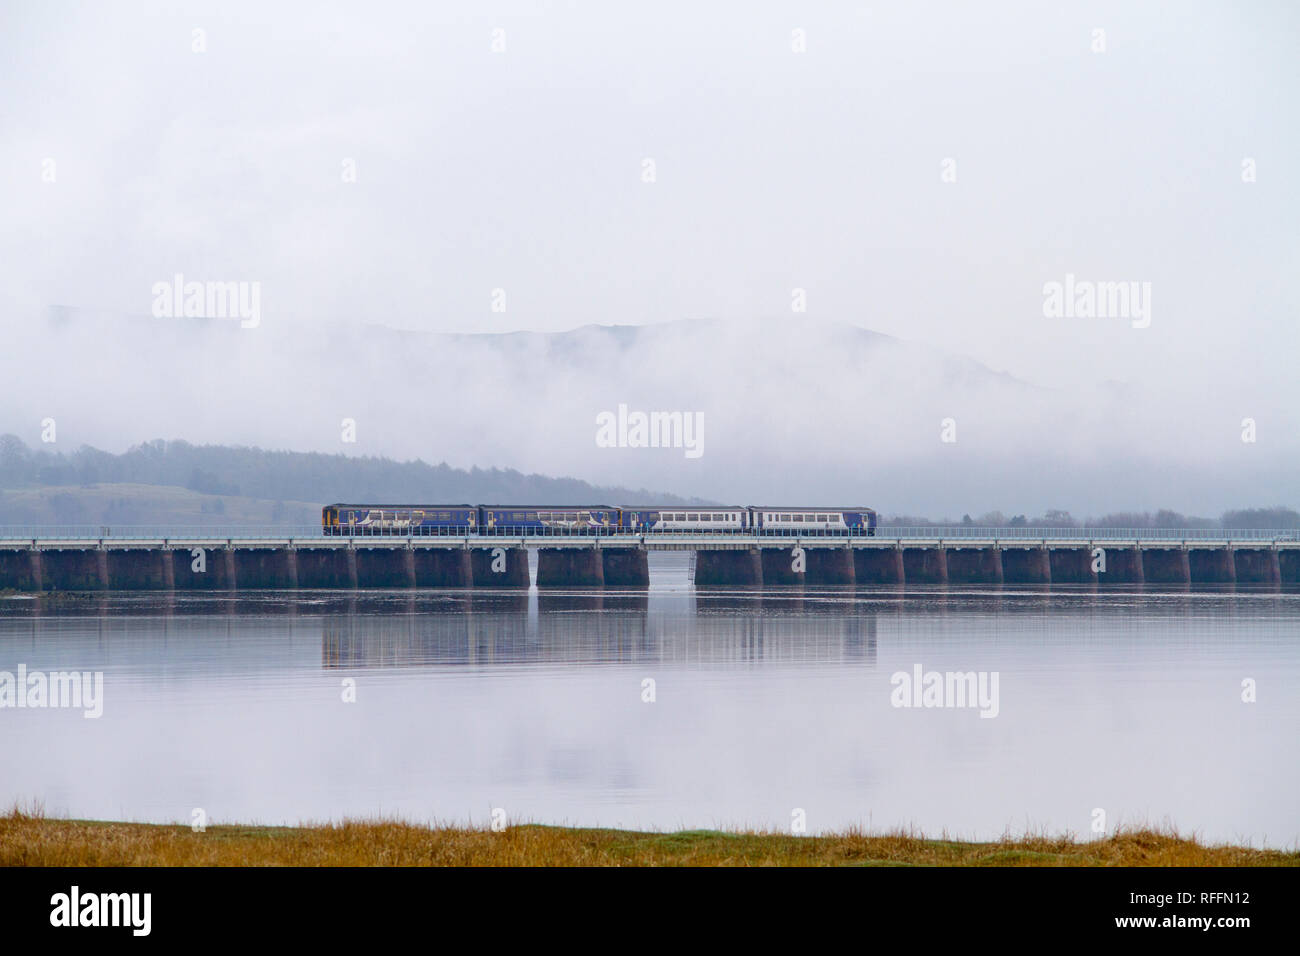 A pair of Northern Railway class 156 diesel multiple units crossing over Leven Viaduct near Ulverston. Stock Photo